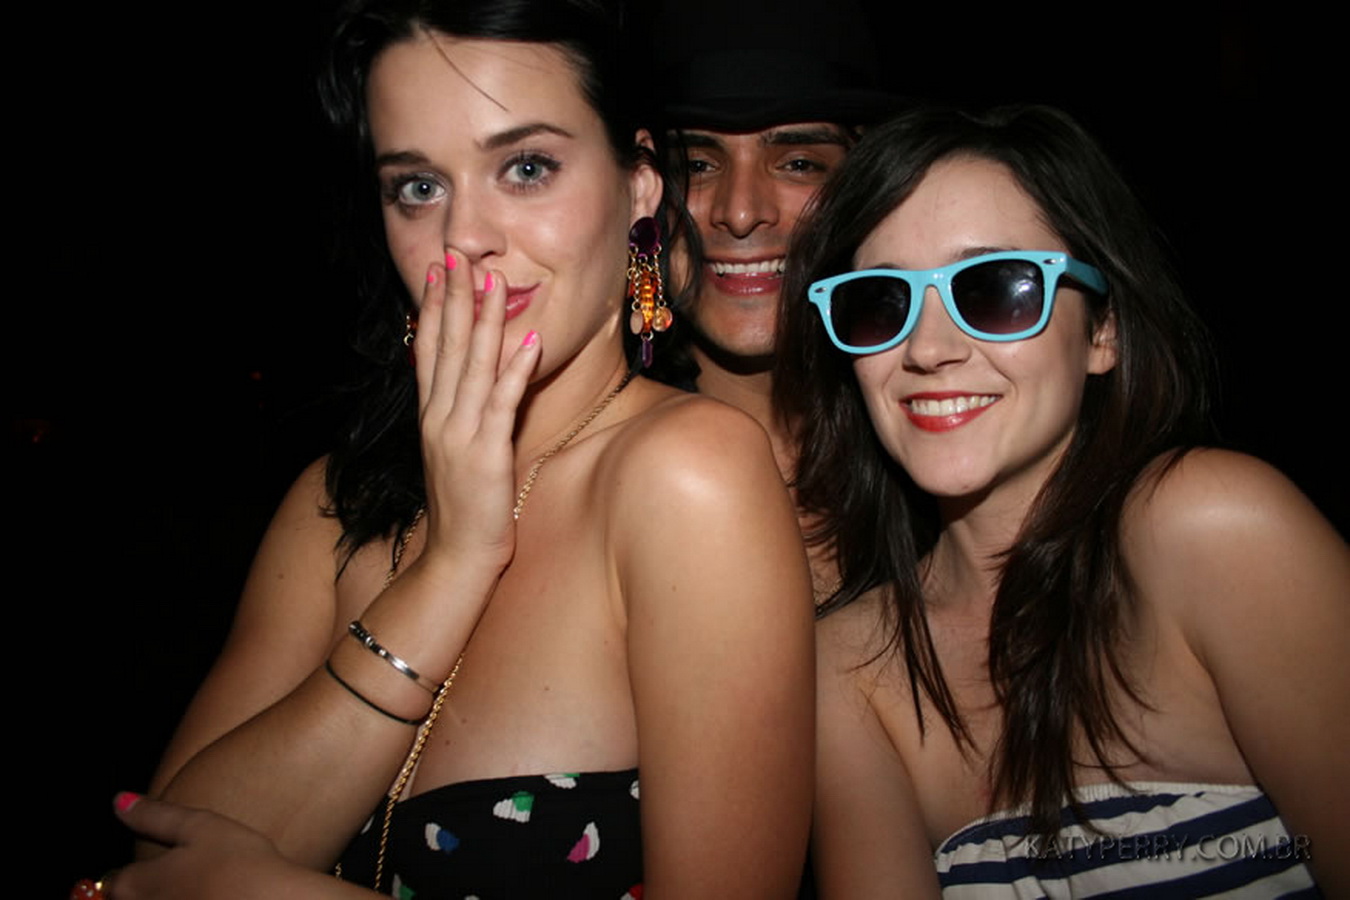 Katy_Perry_bobsslip_drunk_cleavage_downblouse_upskirt_nipslip_at_her_birthday_2007_party_99x_HQ_56.jpg